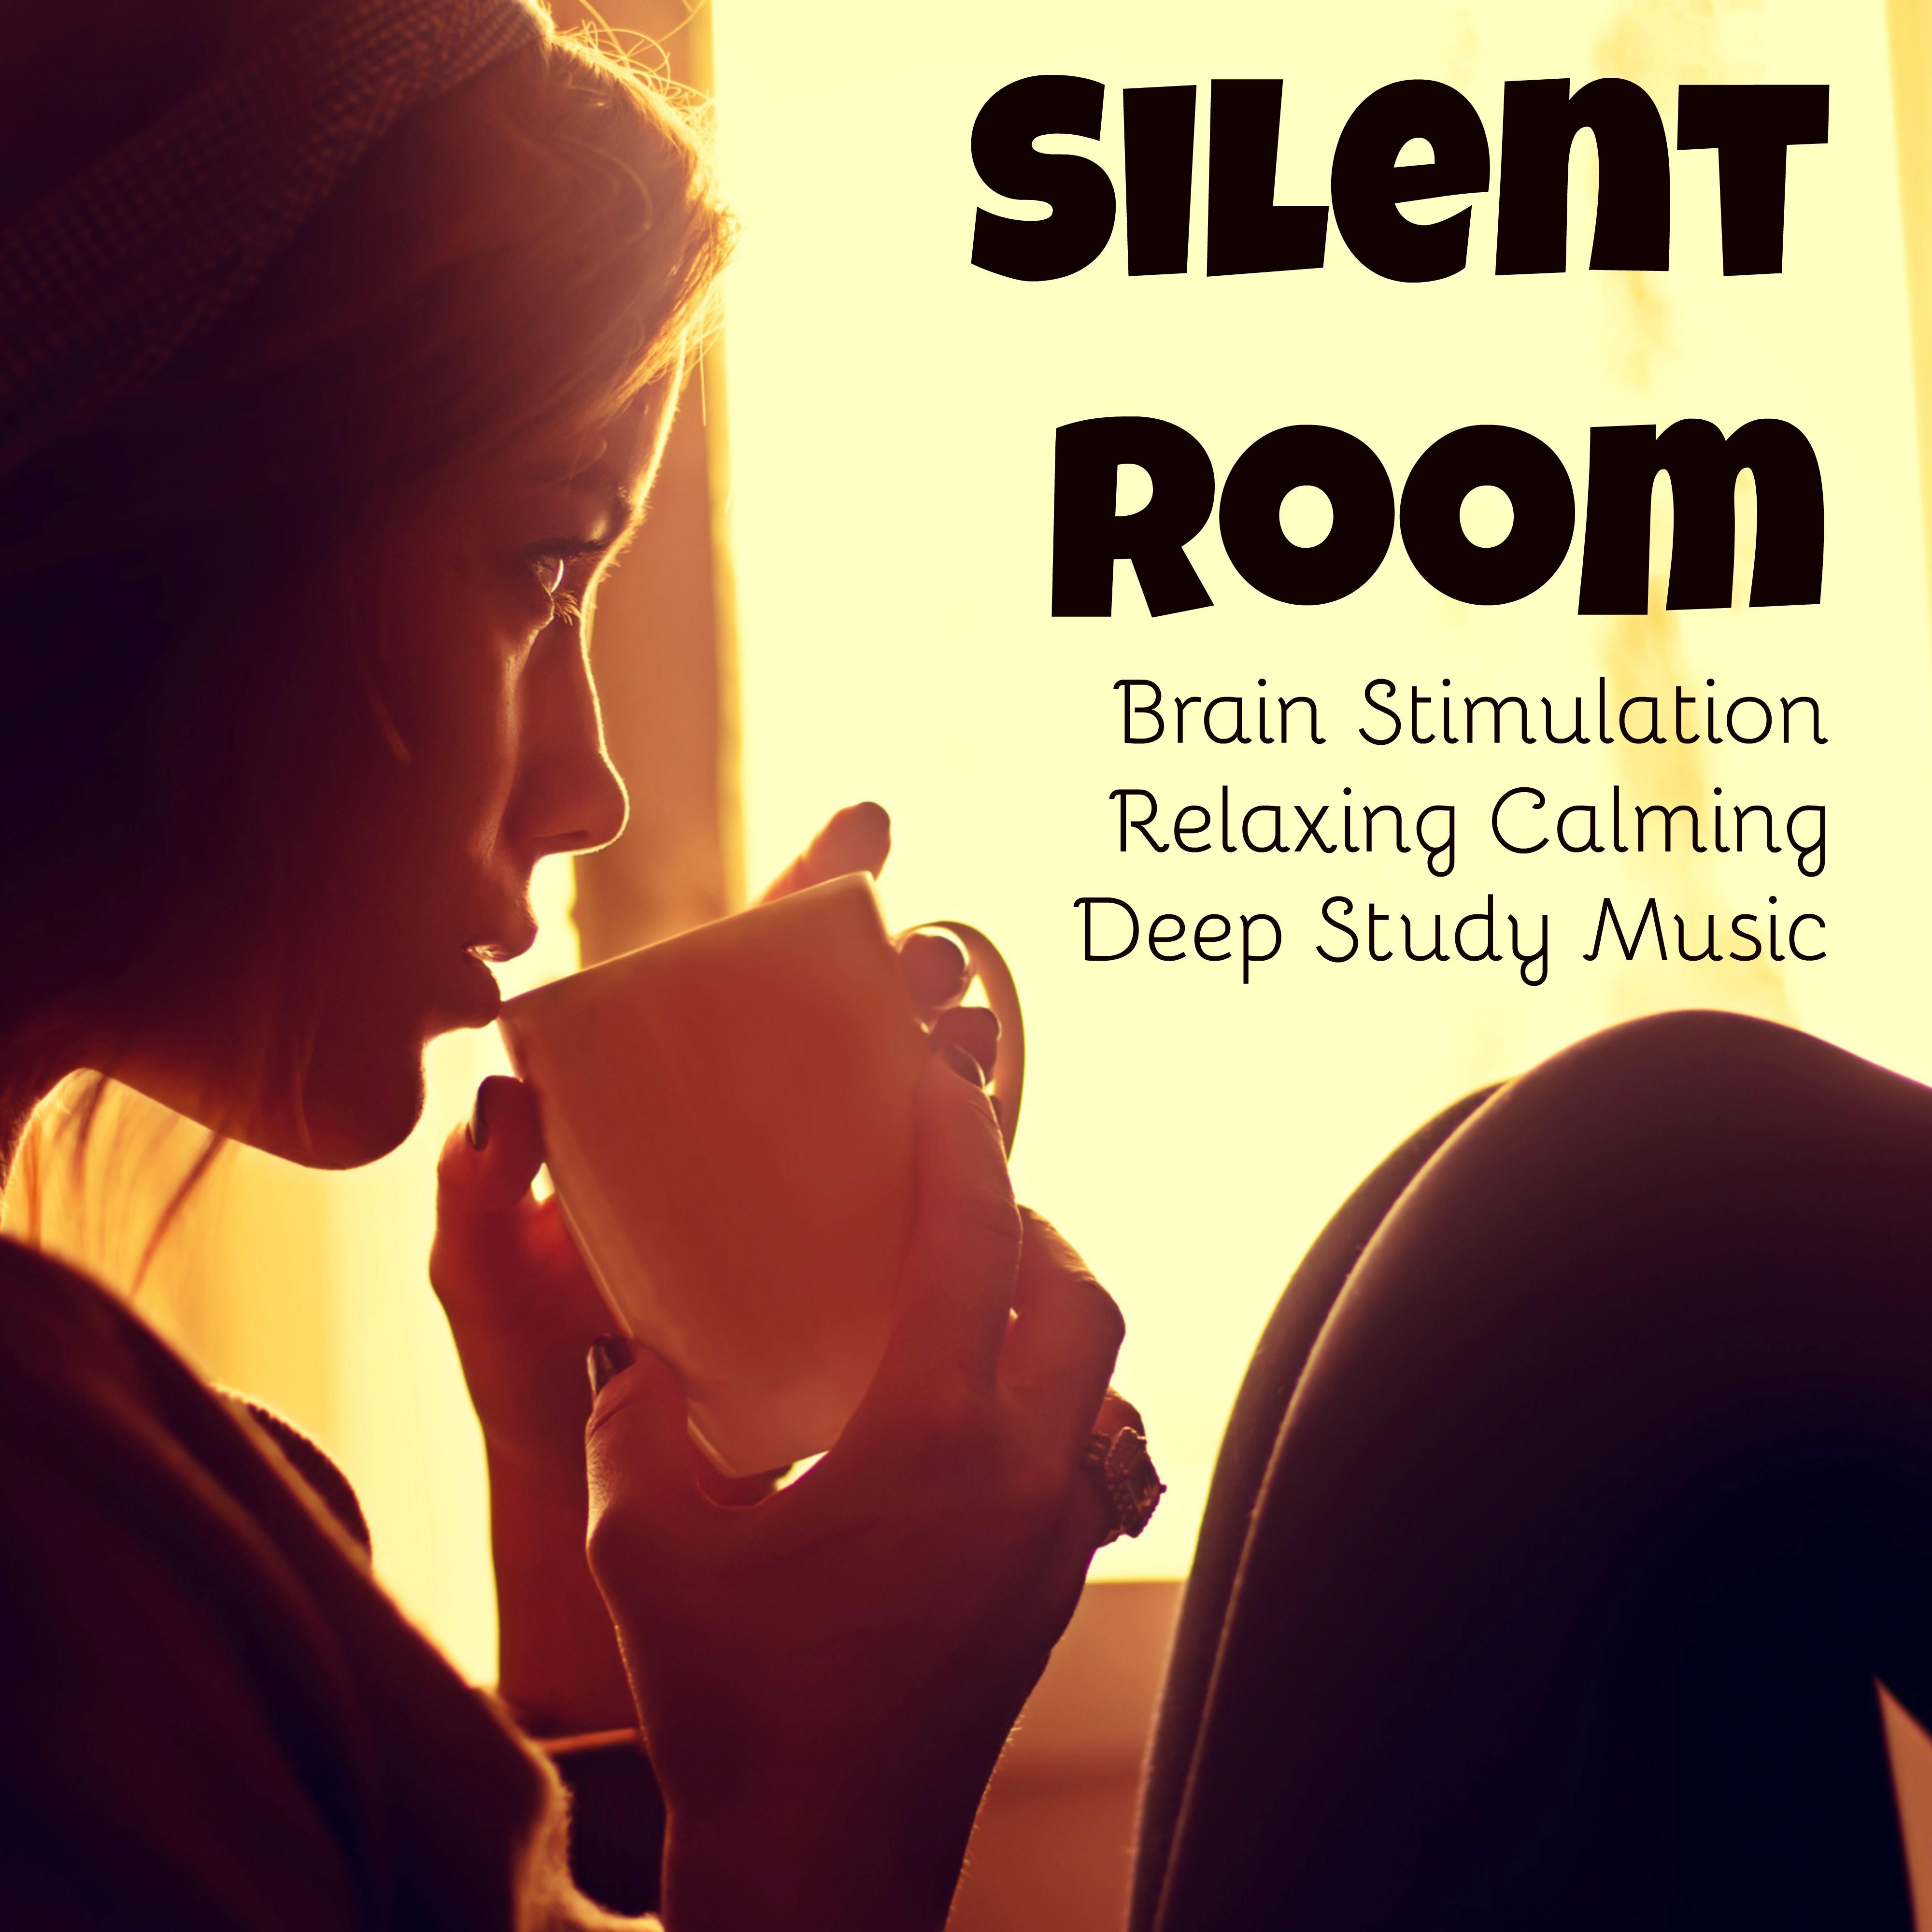 Silent Room - Brain Stimulation Relaxing Calming Deep Study Music to Improve Concentration with Sound of Nature New Age Instrumental